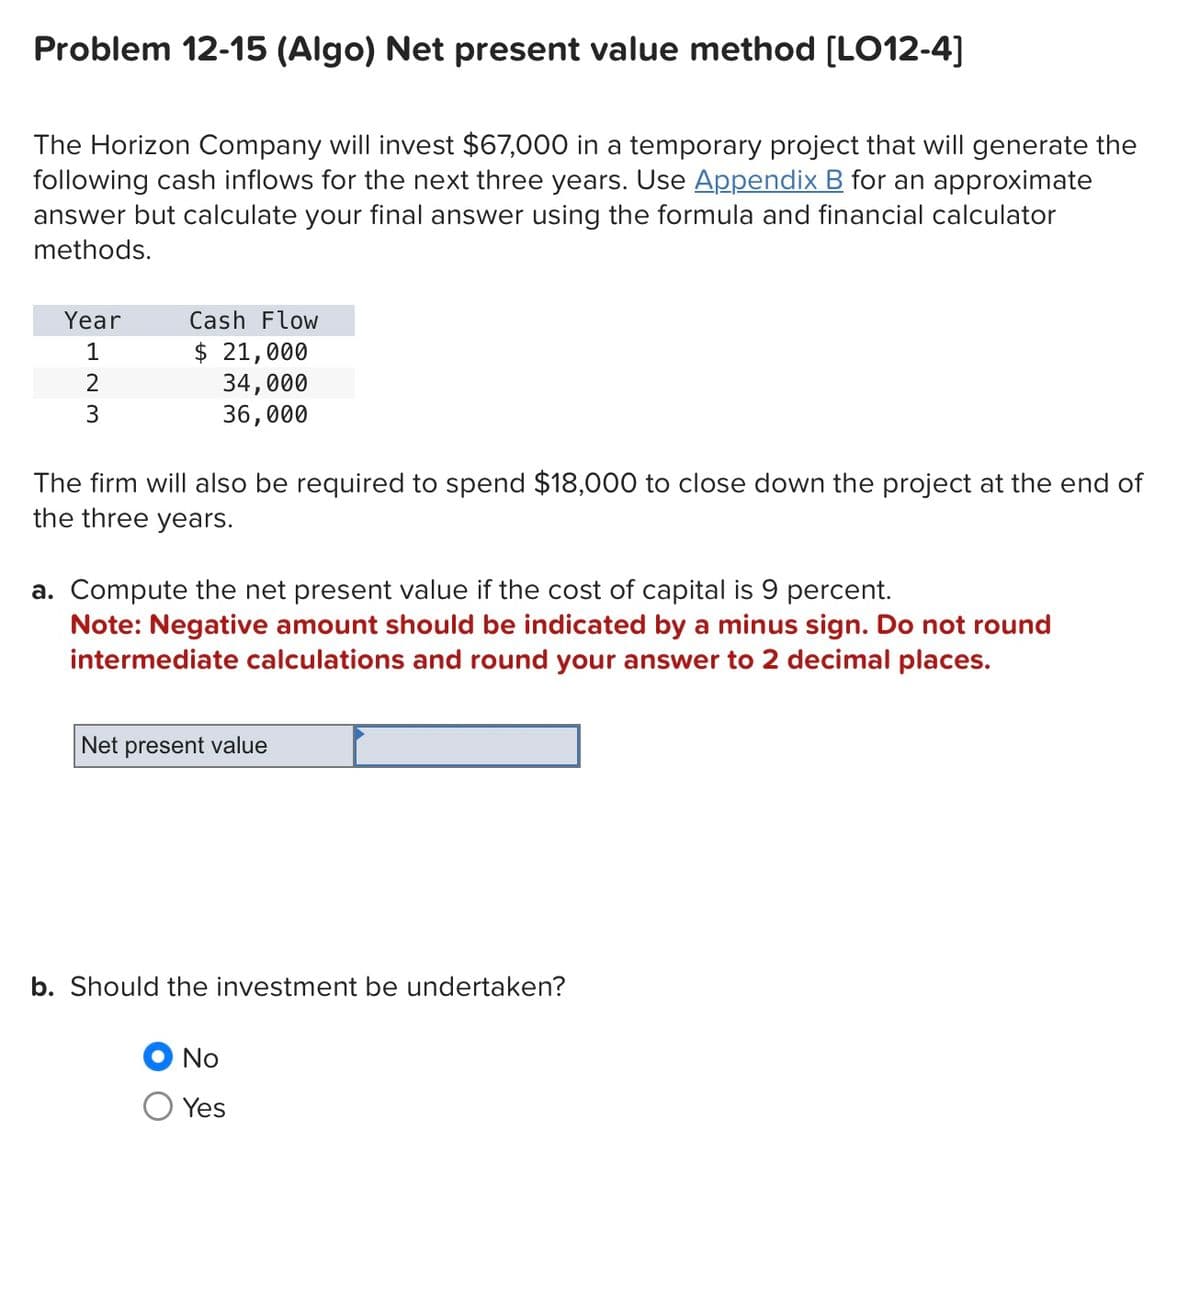 Problem 12-15 (Algo) Net present value method [LO12-4]
The Horizon Company will invest $67,000 in a temporary project that will generate the
following cash inflows for the next three years. Use Appendix B for an approximate
answer but calculate your final answer using the formula and financial calculator
methods.
Year
1
2
3
Cash Flow
$ 21,000
34,000
36,000
The firm will also be required to spend $18,000 to close down the project at the end of
the three years.
a. Compute the net present value if the cost of capital is 9 percent.
Note: Negative amount should be indicated by a minus sign. Do not round
intermediate calculations and round your answer to 2 decimal places.
Net present value
b. Should the investment be undertaken?
No
Yes